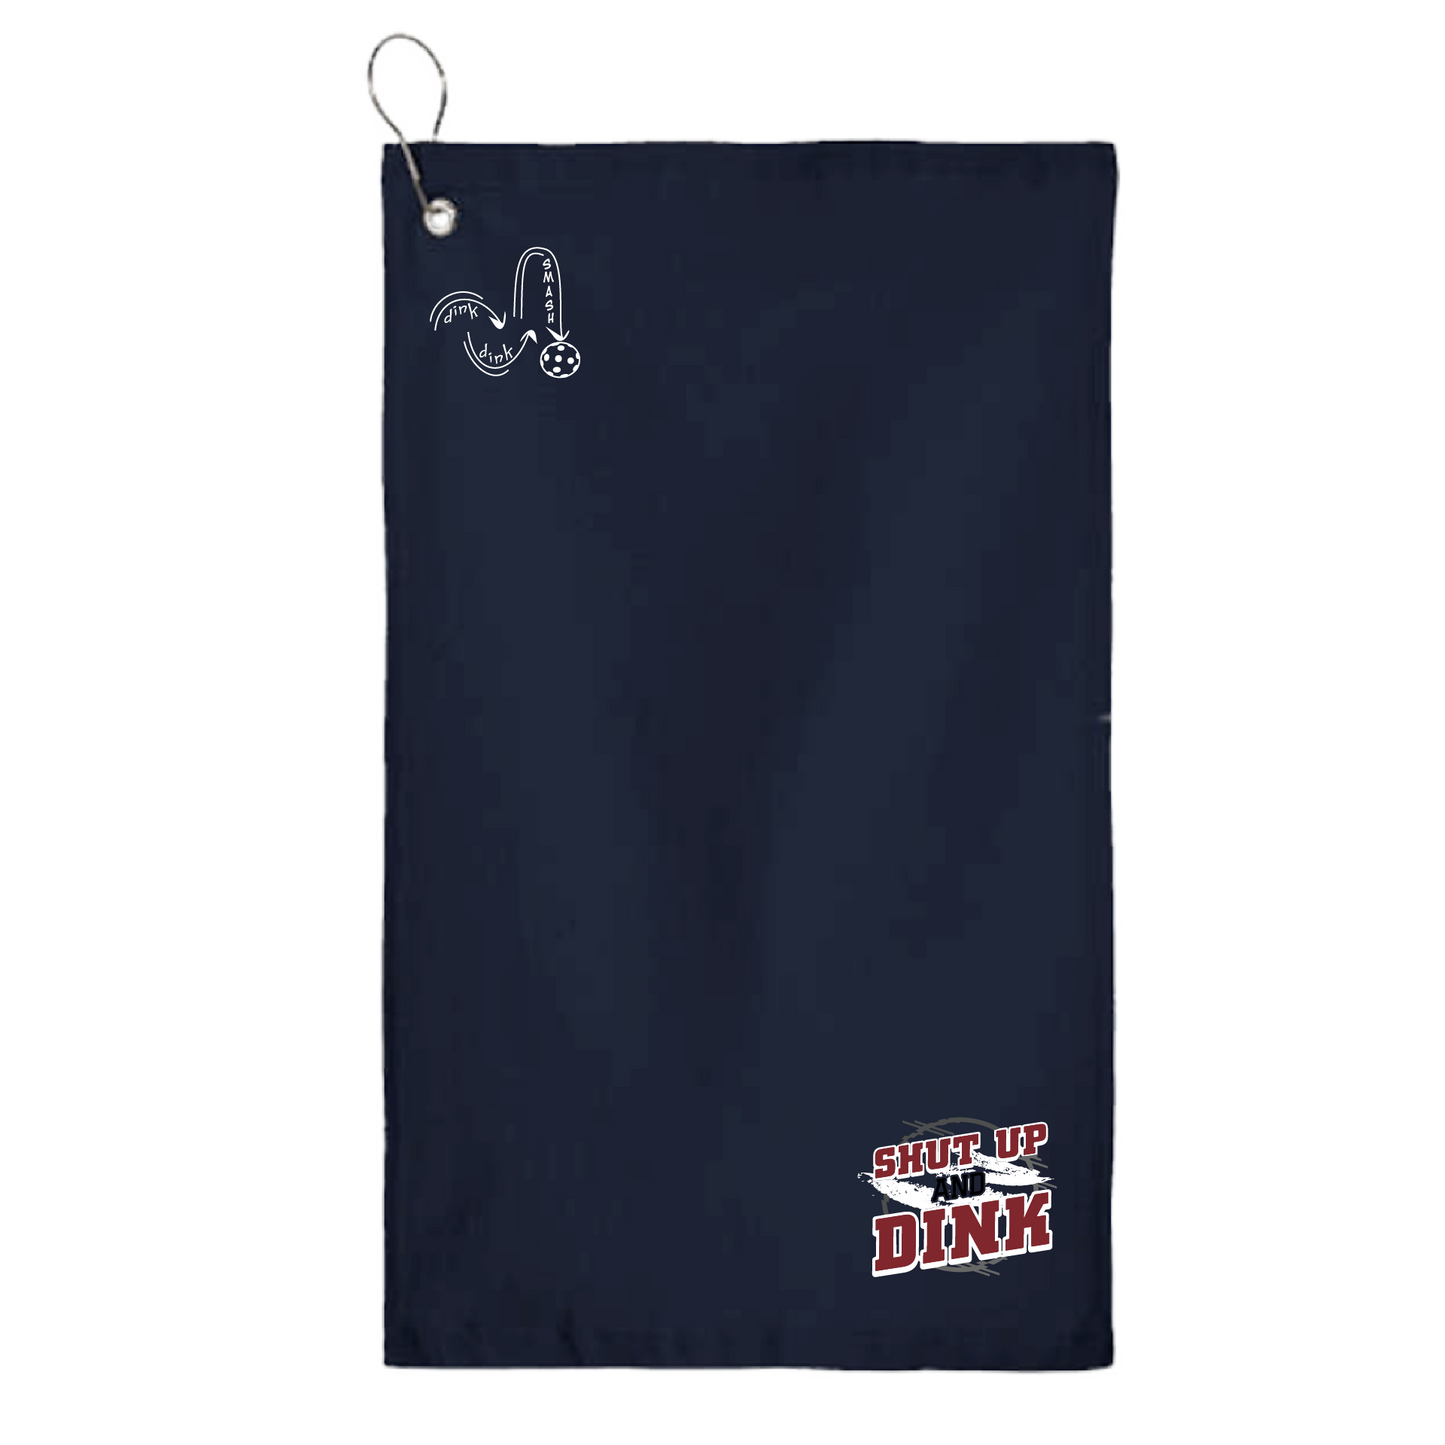 This Shut Up and Dink Pickleball towel is crafted with cotton terry velour for optimal performance. It features grommets, hooks, and hemmed edges for added durability. It's perfect for completing your pickleball gear, and an ideal gift for friends and tournaments. The towel is designed to be both absorbent and lightweight, so you can remain dry and comfortable while you play. 